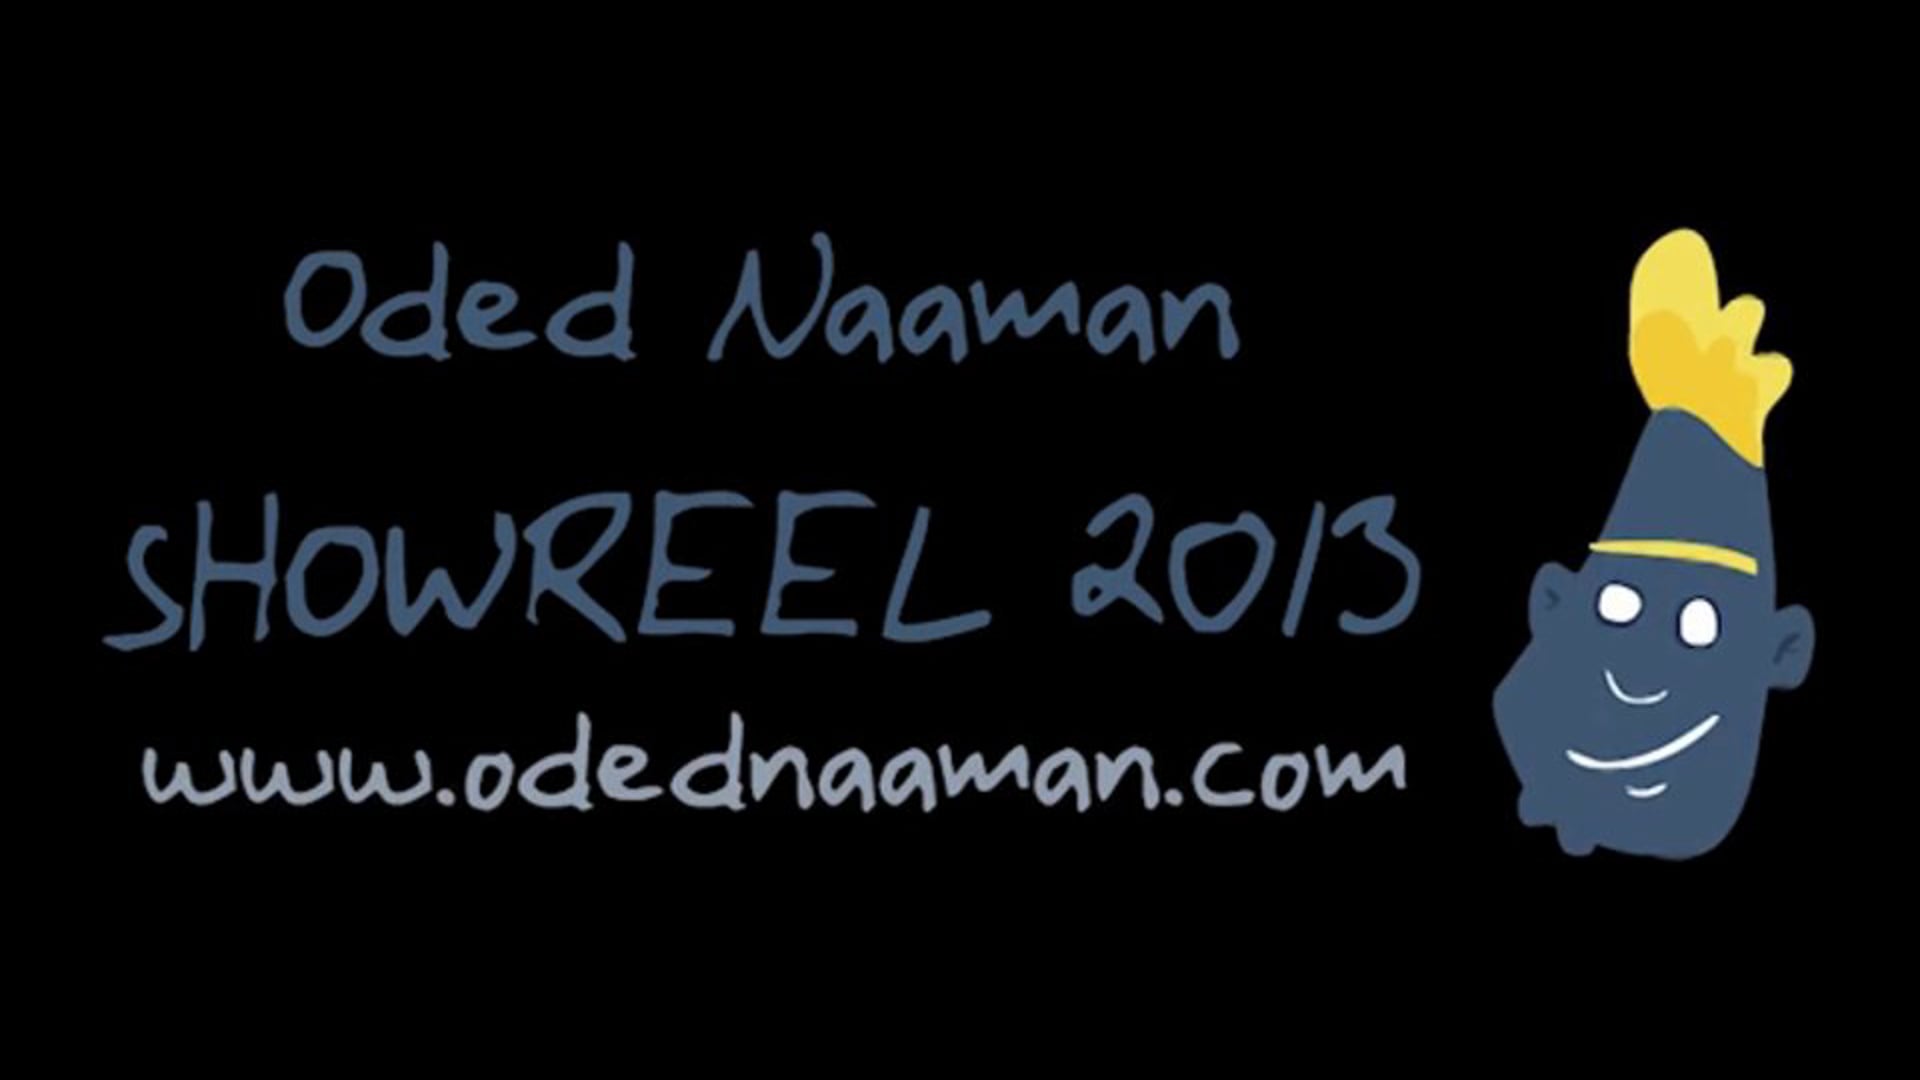 Oded Naaman - Animation Showreel 2013